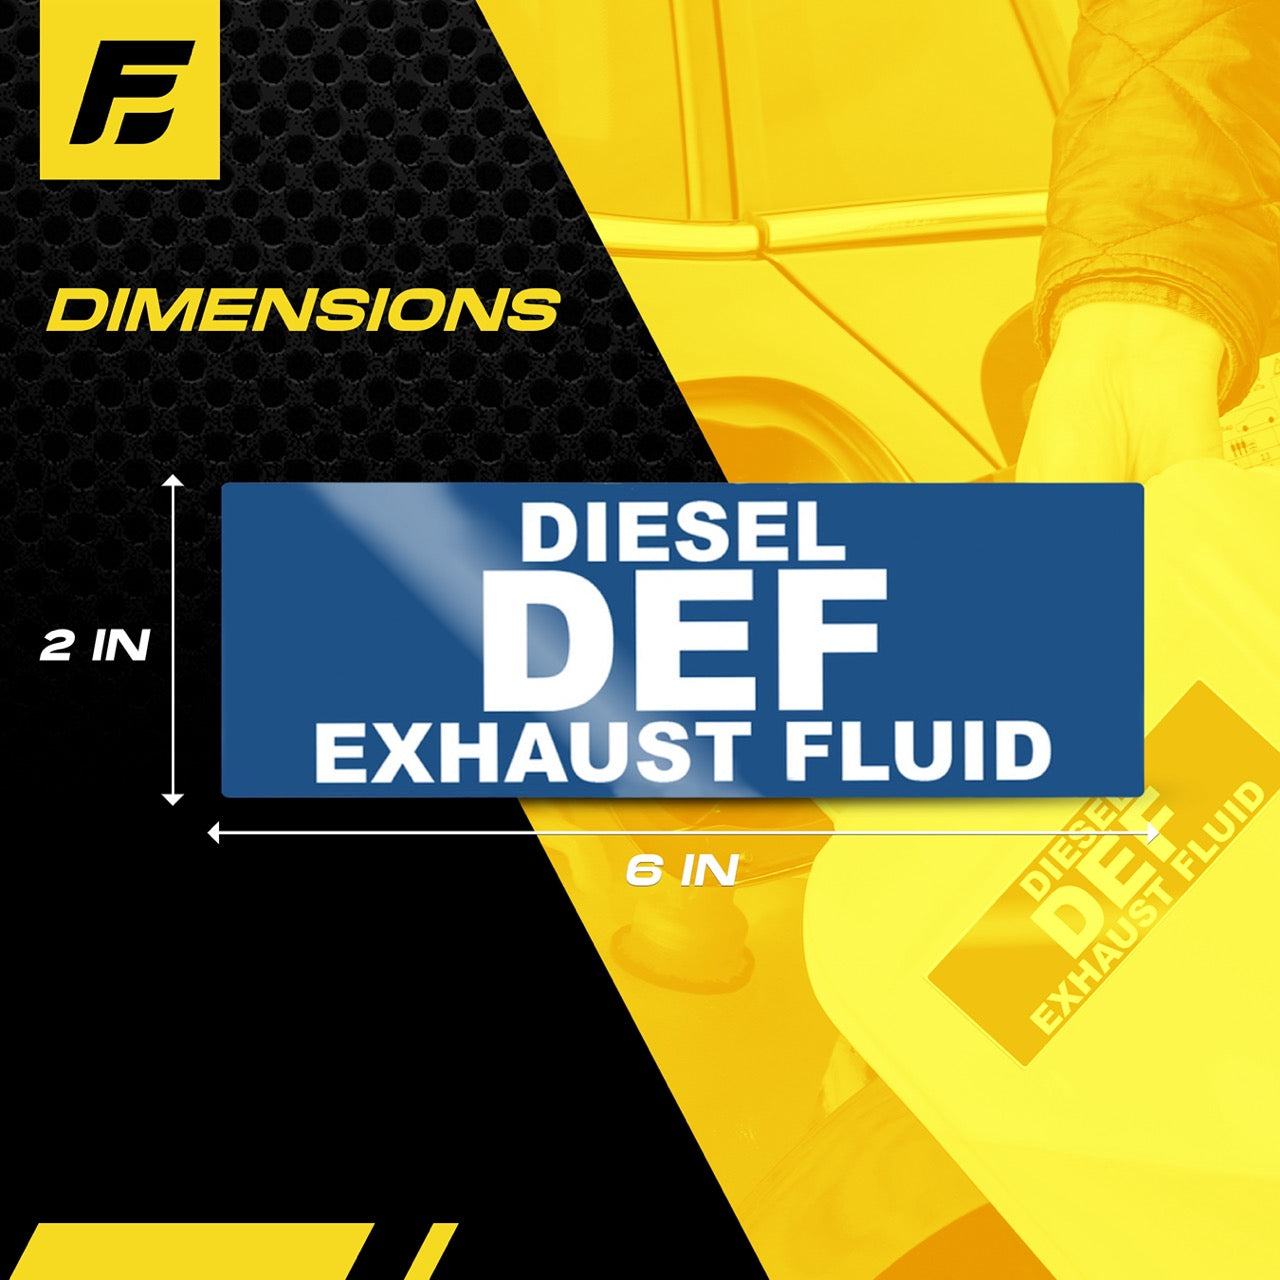 DEF Only Sticker - Diesel Exhaust Fluid Label by Fuel Stickers | 6"x2" | 2 Labels